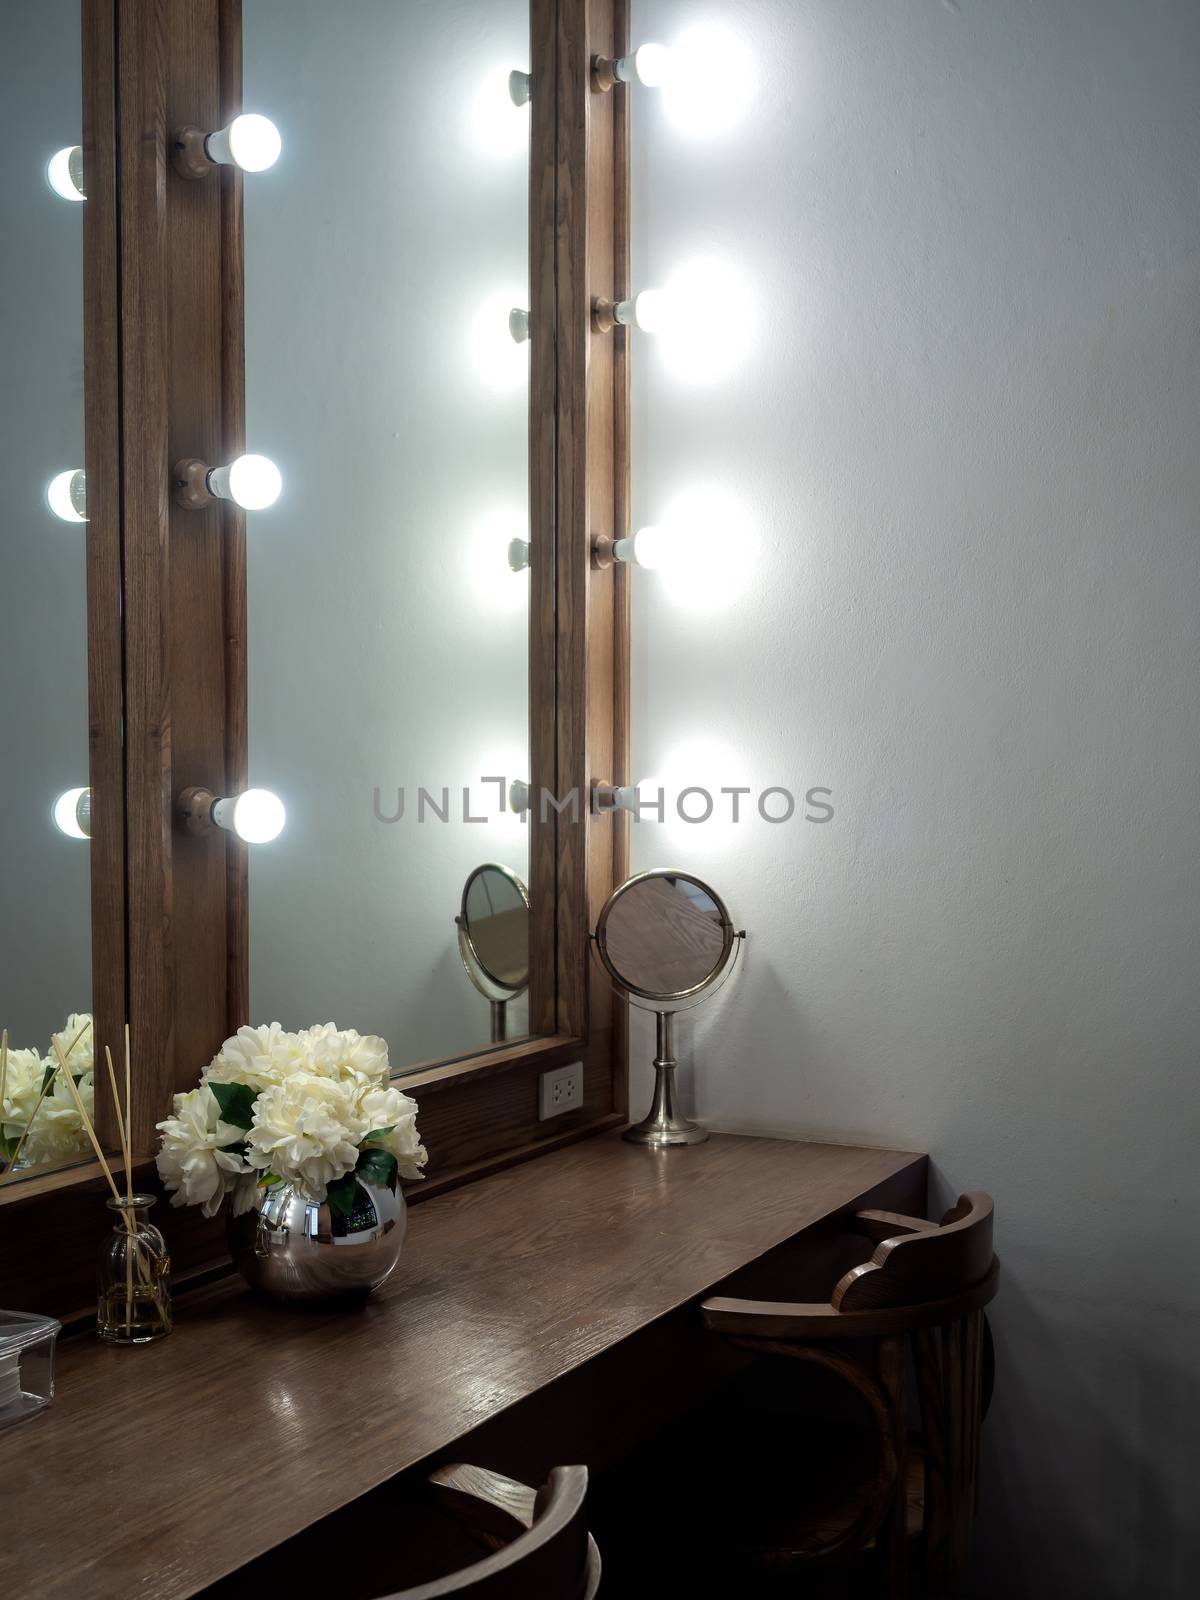 Makeup room classic and vintage style decoration with long wooden table, wooden chairs, mirrors with light bulbs and modern flower pot, vertical style.